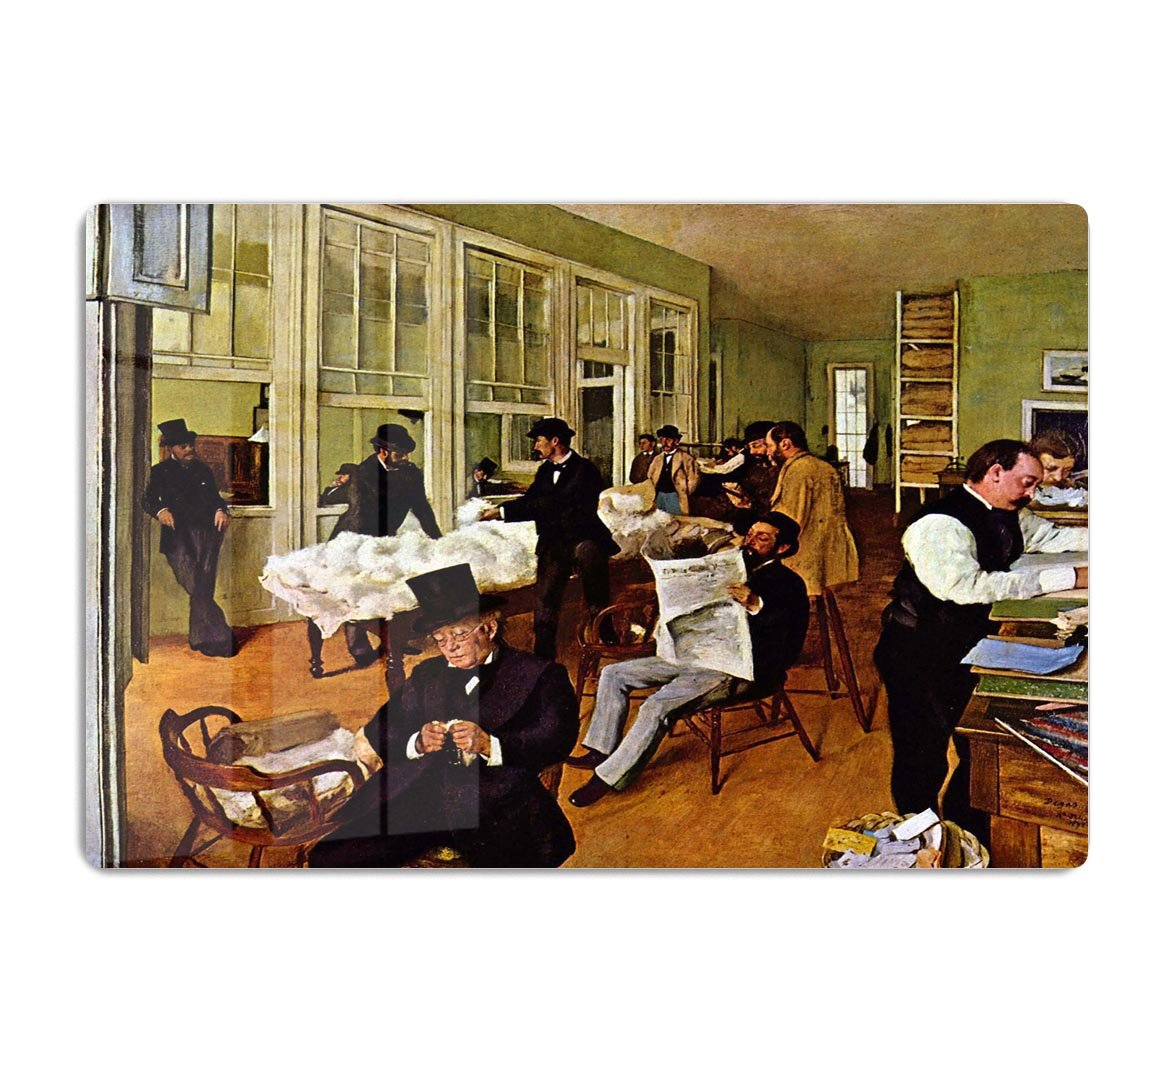 The cotton office in New Orleans by Degas HD Metal Print - Canvas Art Rocks - 1